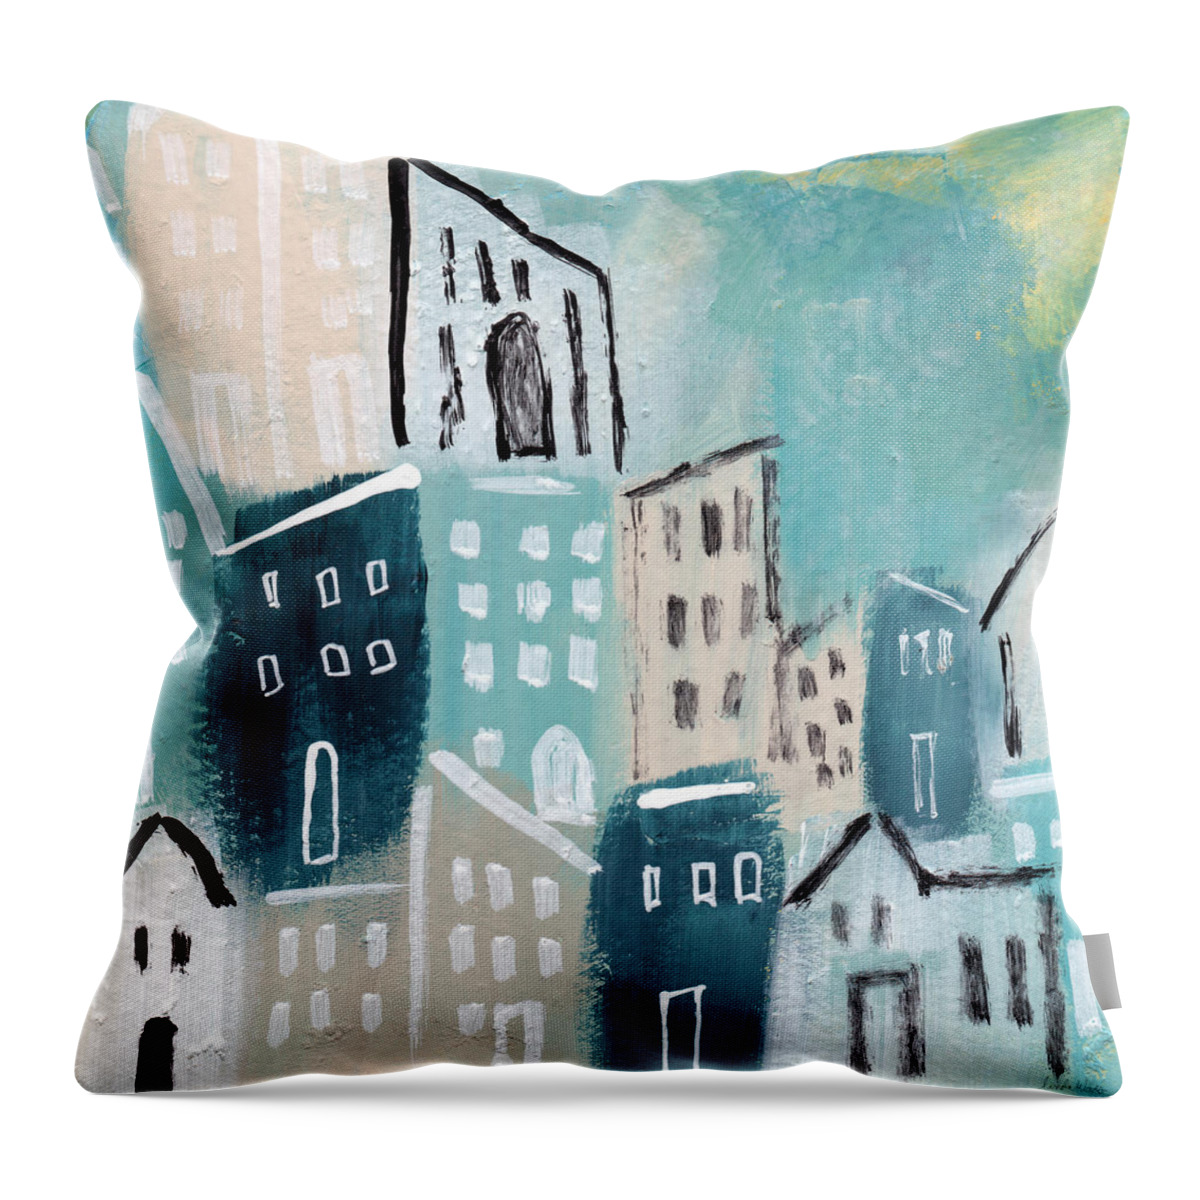 Town Throw Pillow featuring the painting Beach Town- Art by Linda Woods by Linda Woods